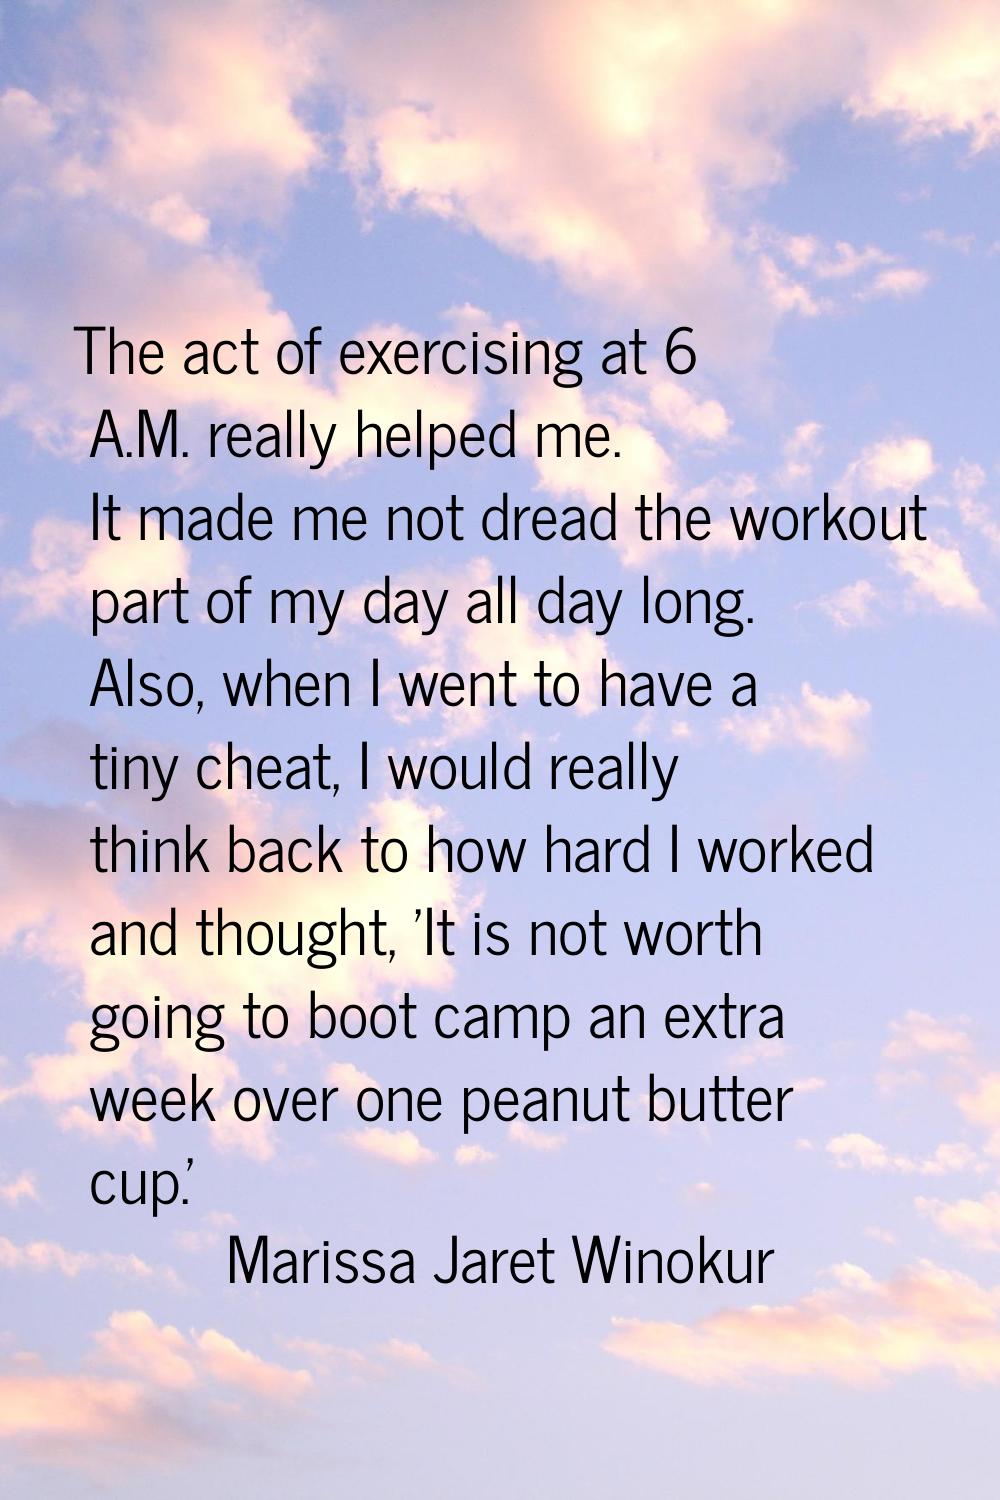 The act of exercising at 6 A.M. really helped me. It made me not dread the workout part of my day a